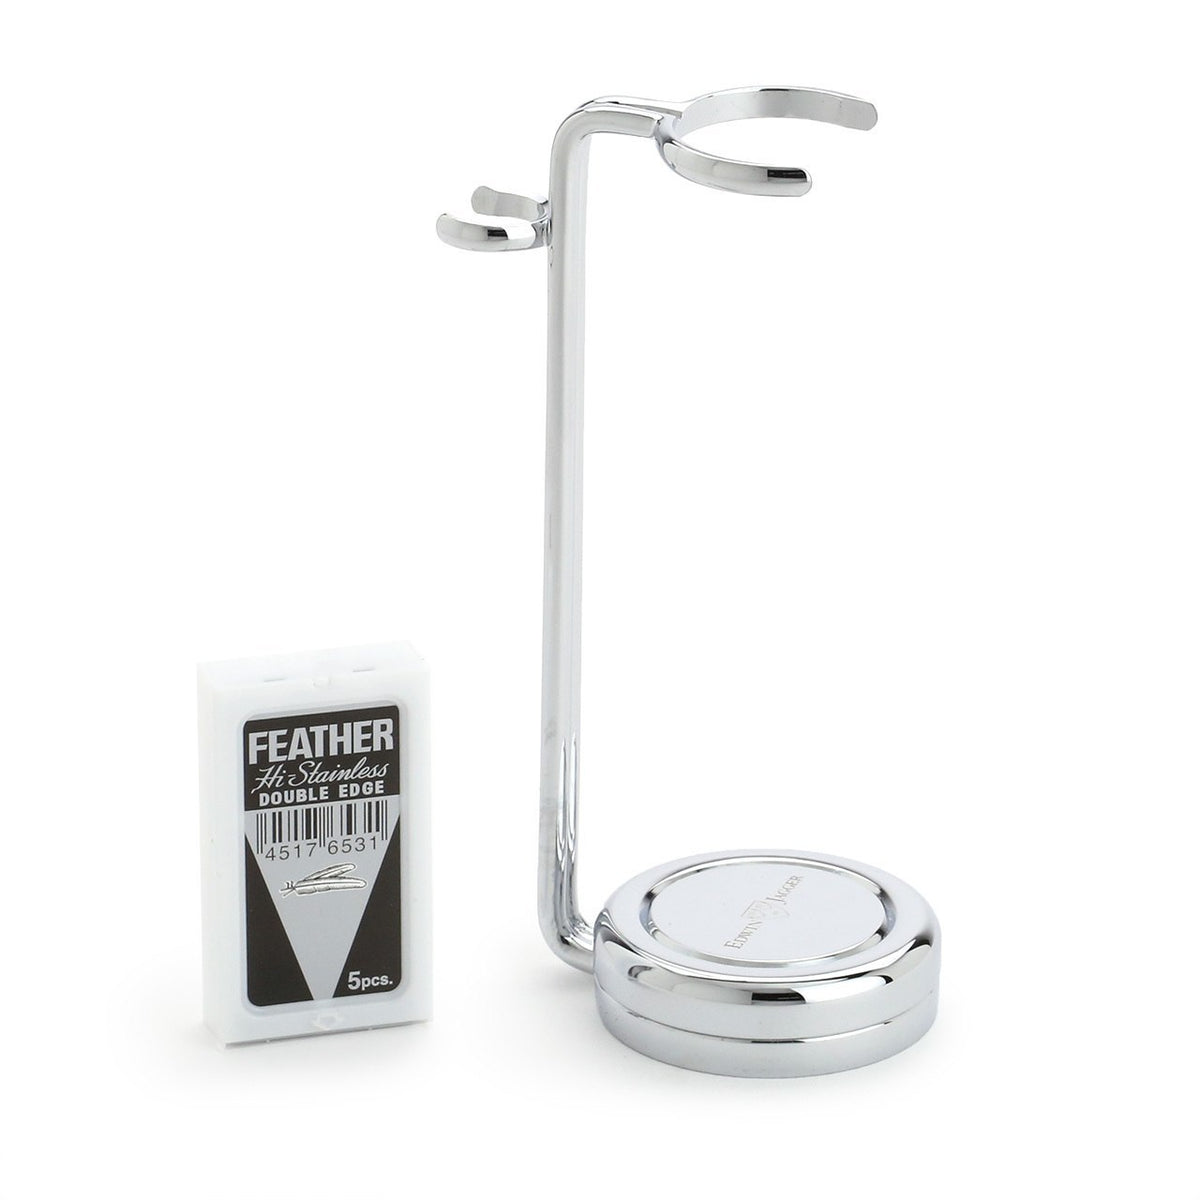 Edwin Jagger shaving stand for brush and safety razor, with a tuck of feather blades